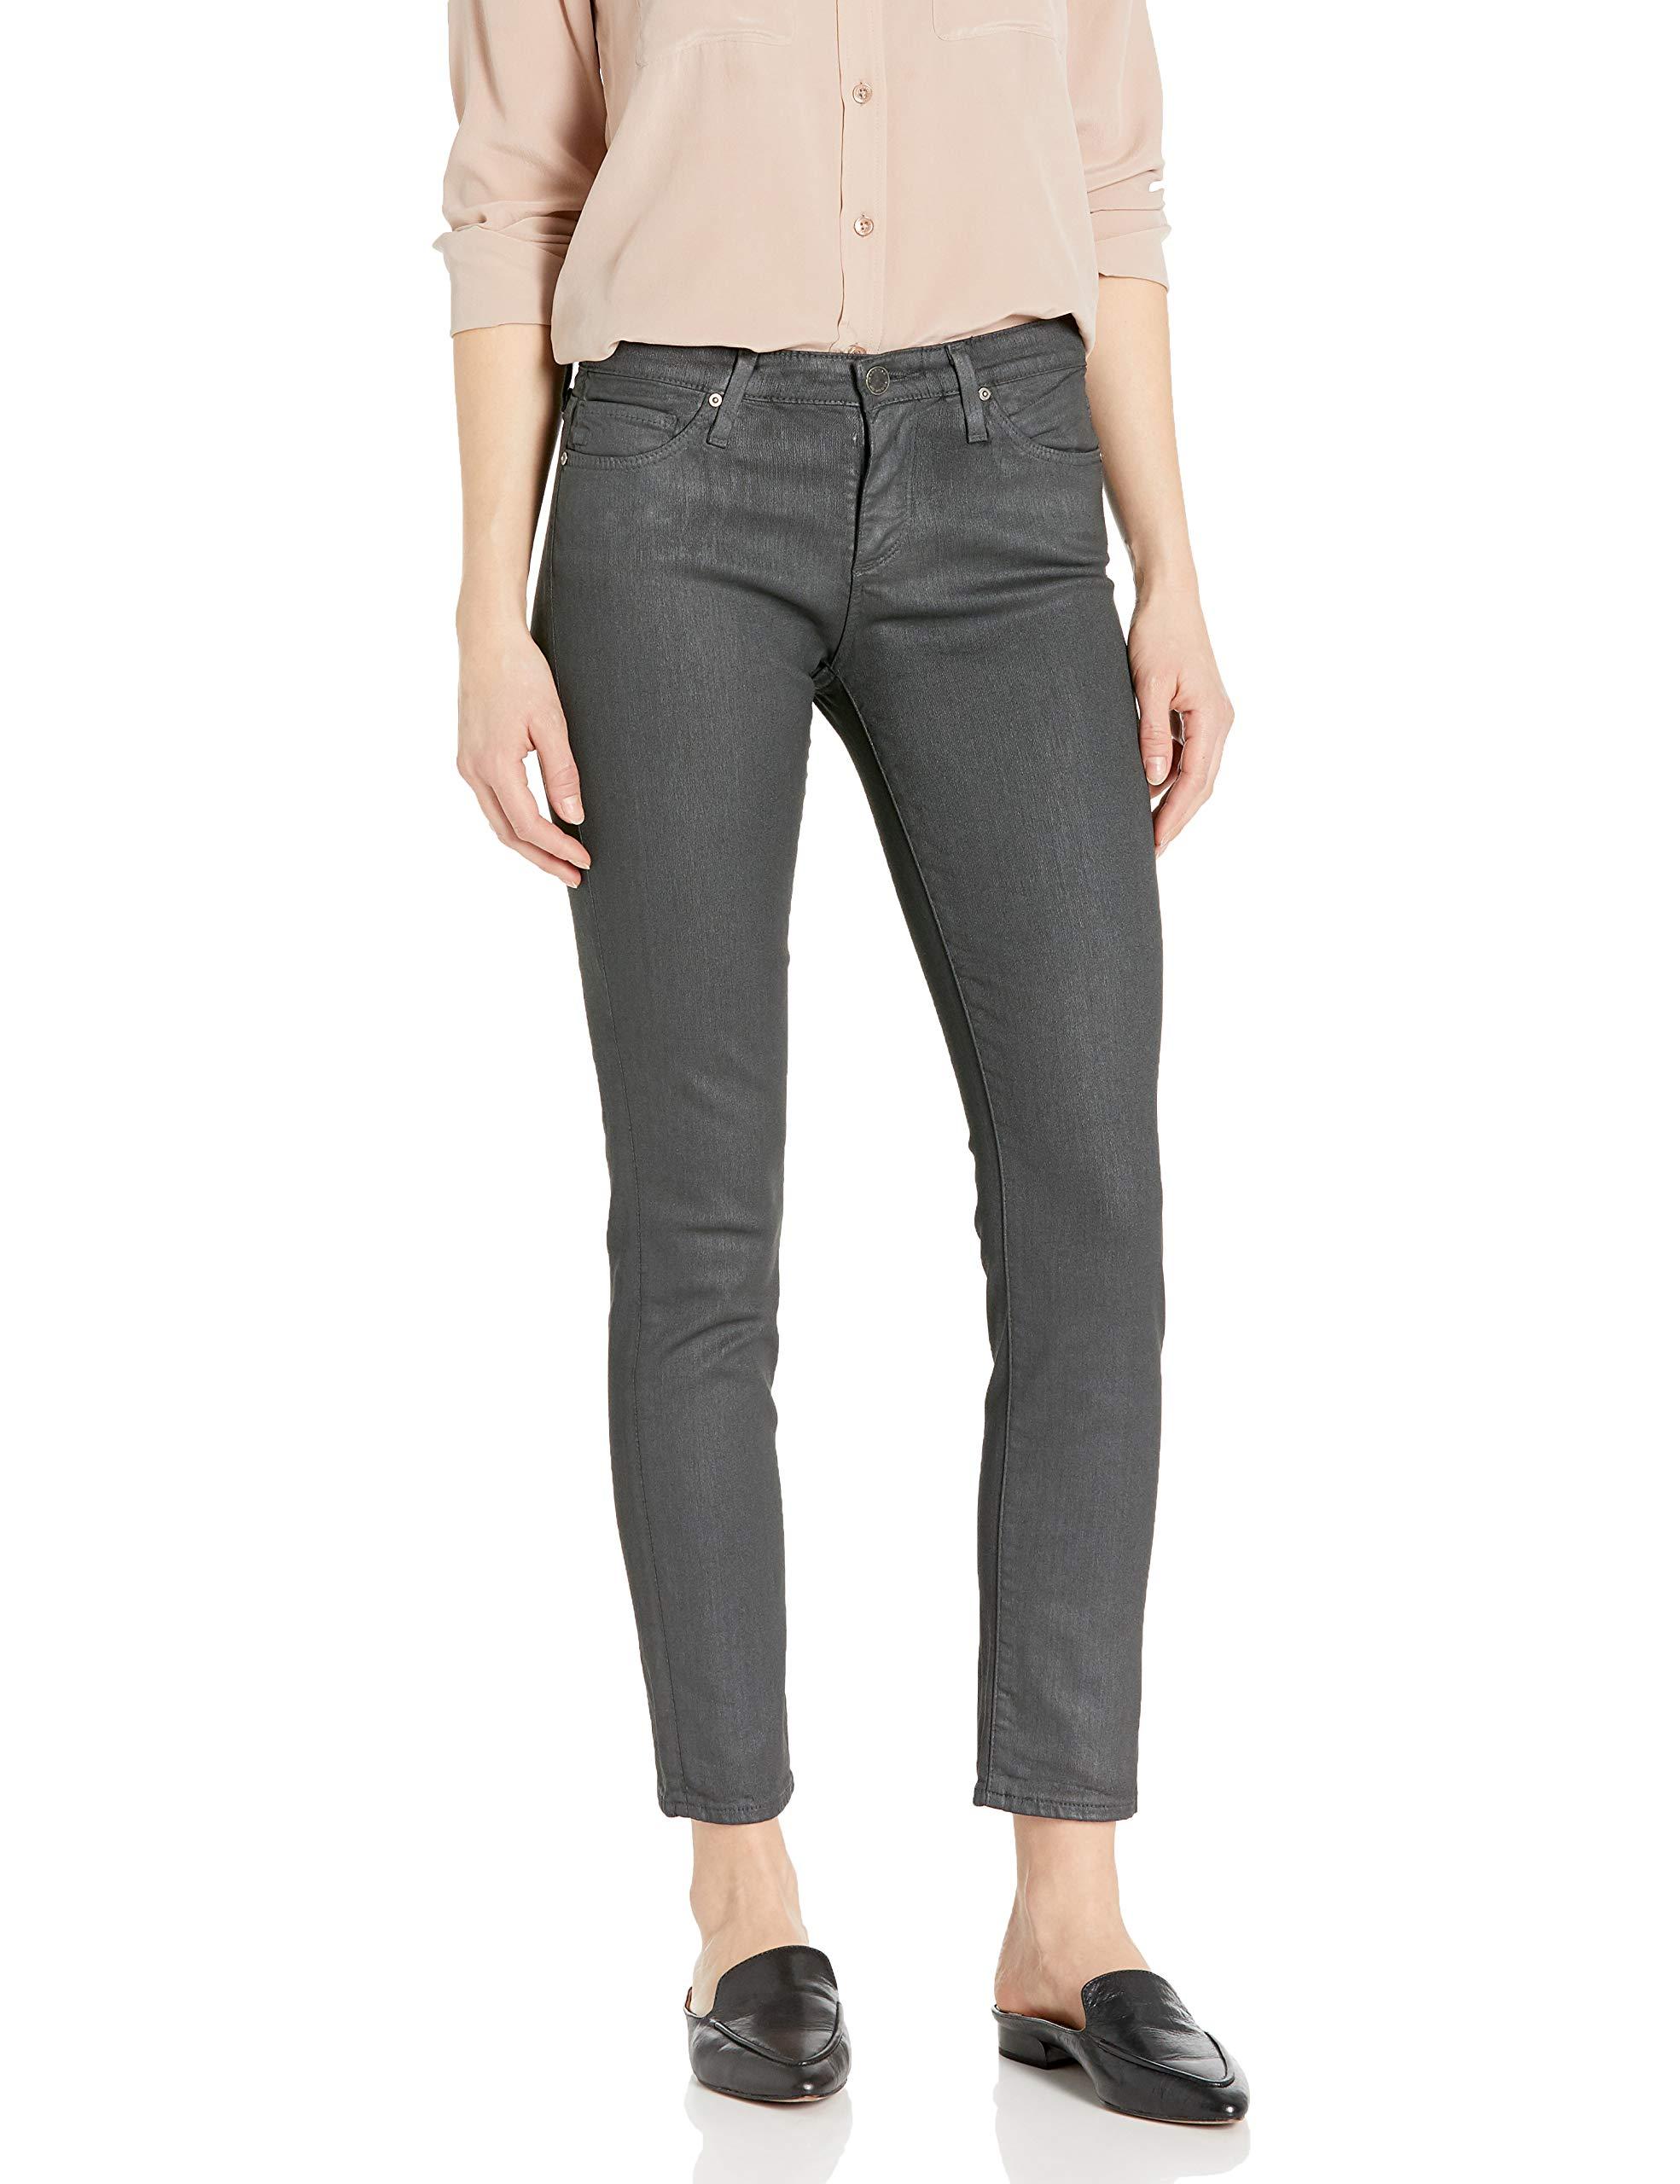 AG Jeans Prima Mid Rise Cigarette Fit Ankle Jean in Gray - Lyst